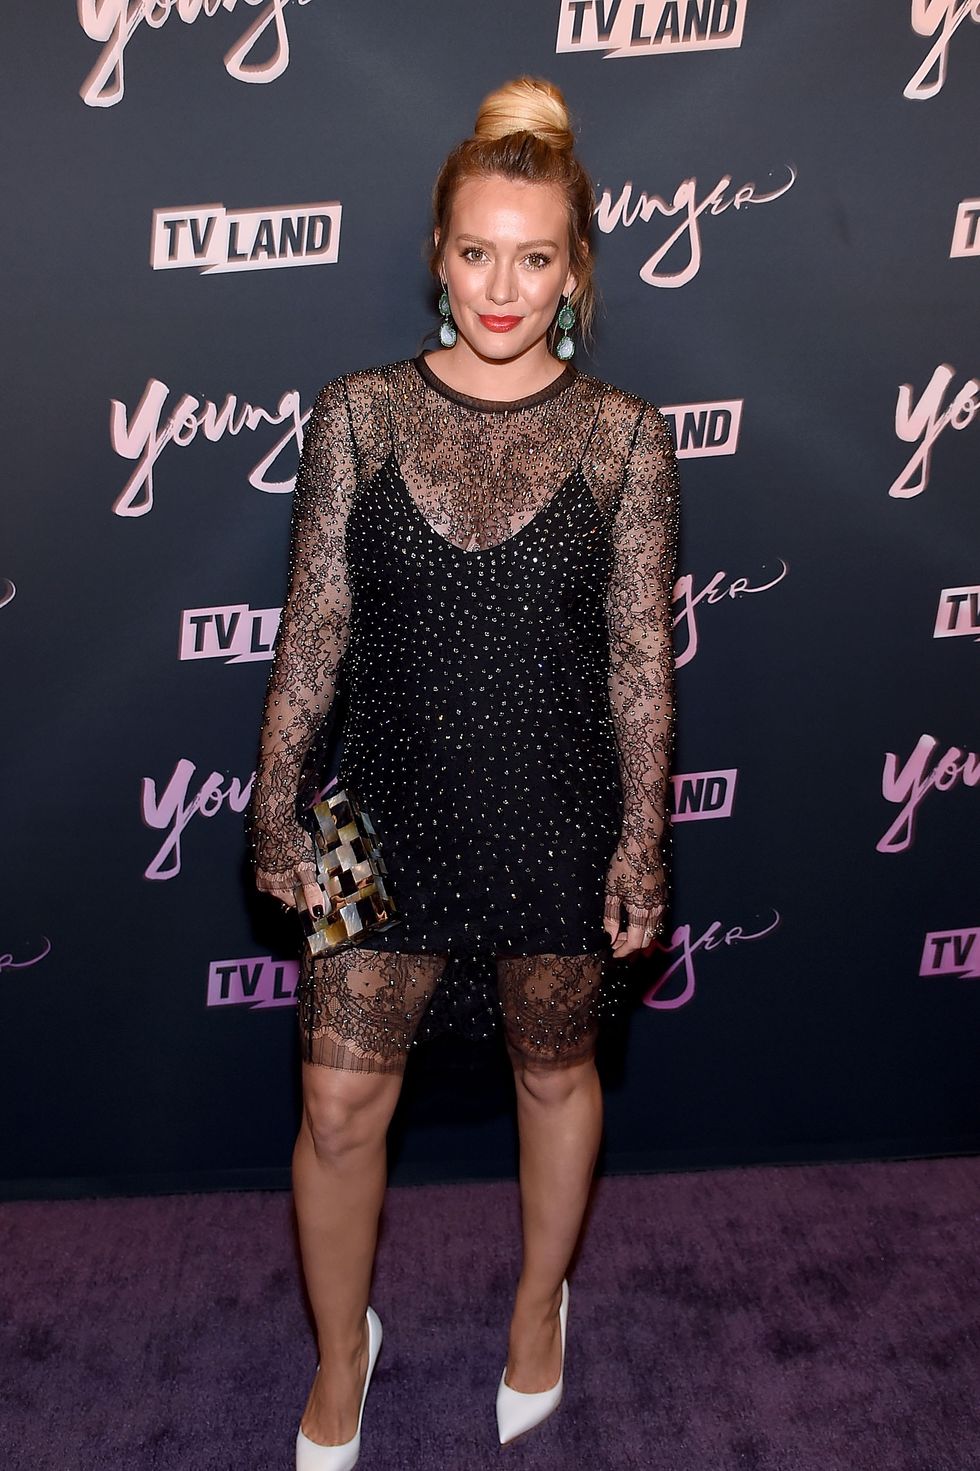 How I Met Your Father Star Hilary Duff Wore A Daring See Through Dress And Floored Fans